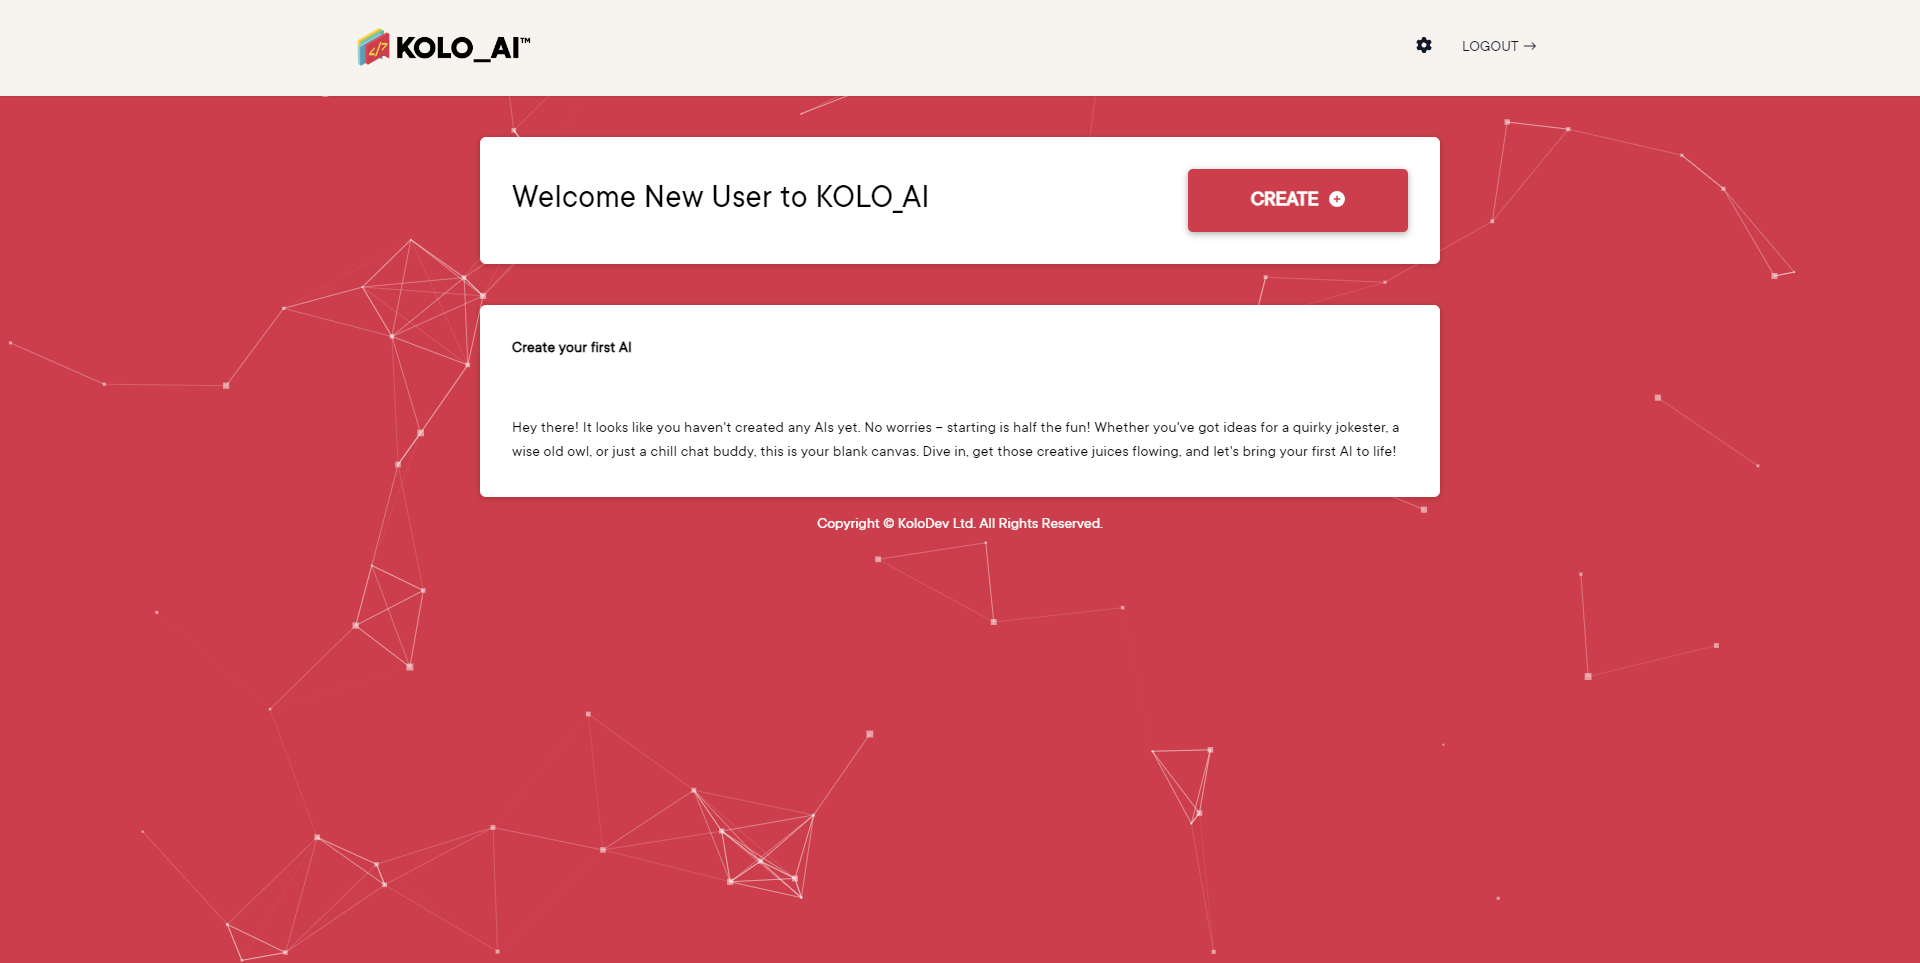 KOLO_AI Home Page when Signed In